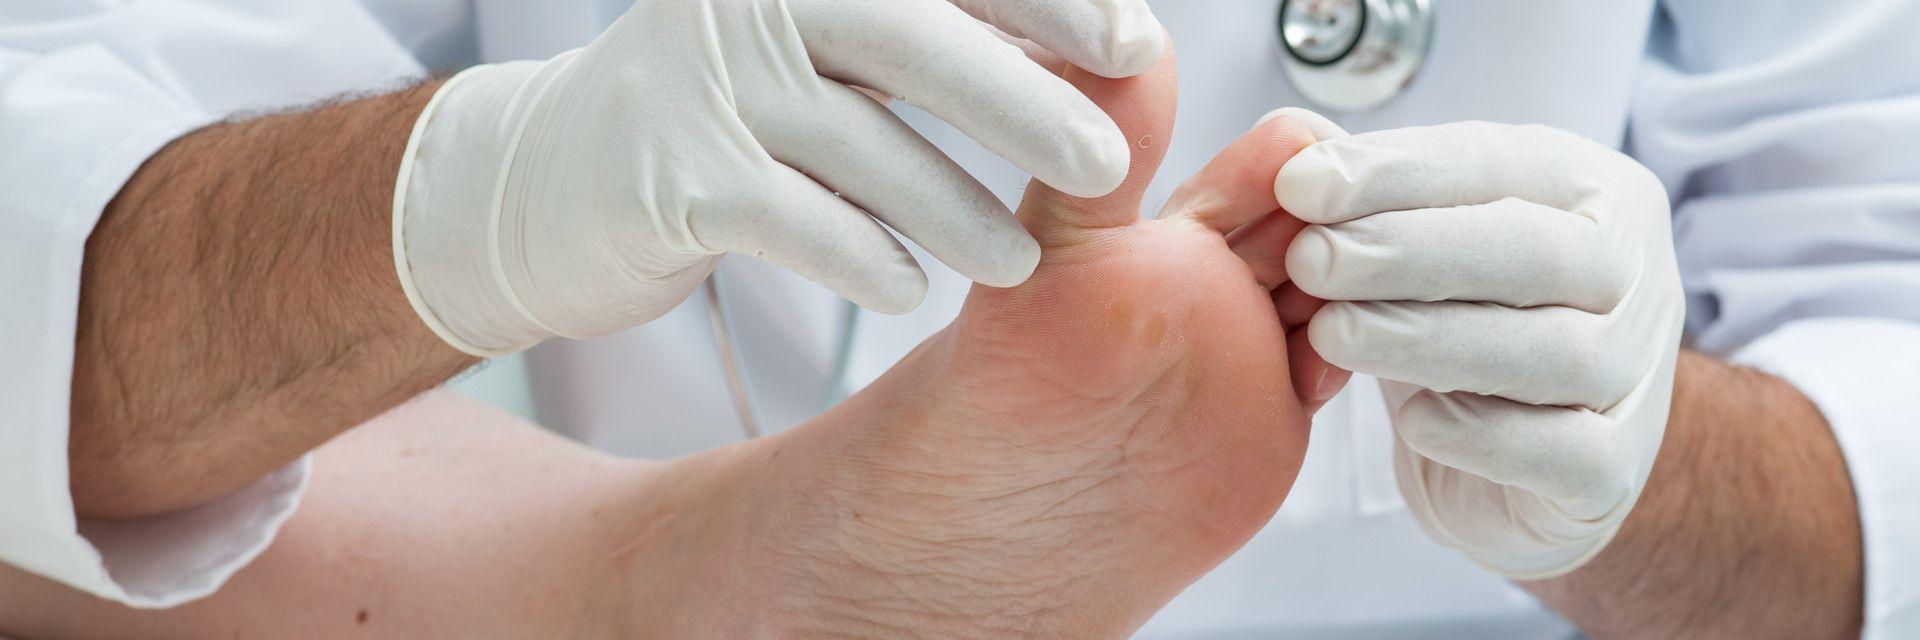 Rothman Orthopaedic Institute Provides The Best Toe Nail ...